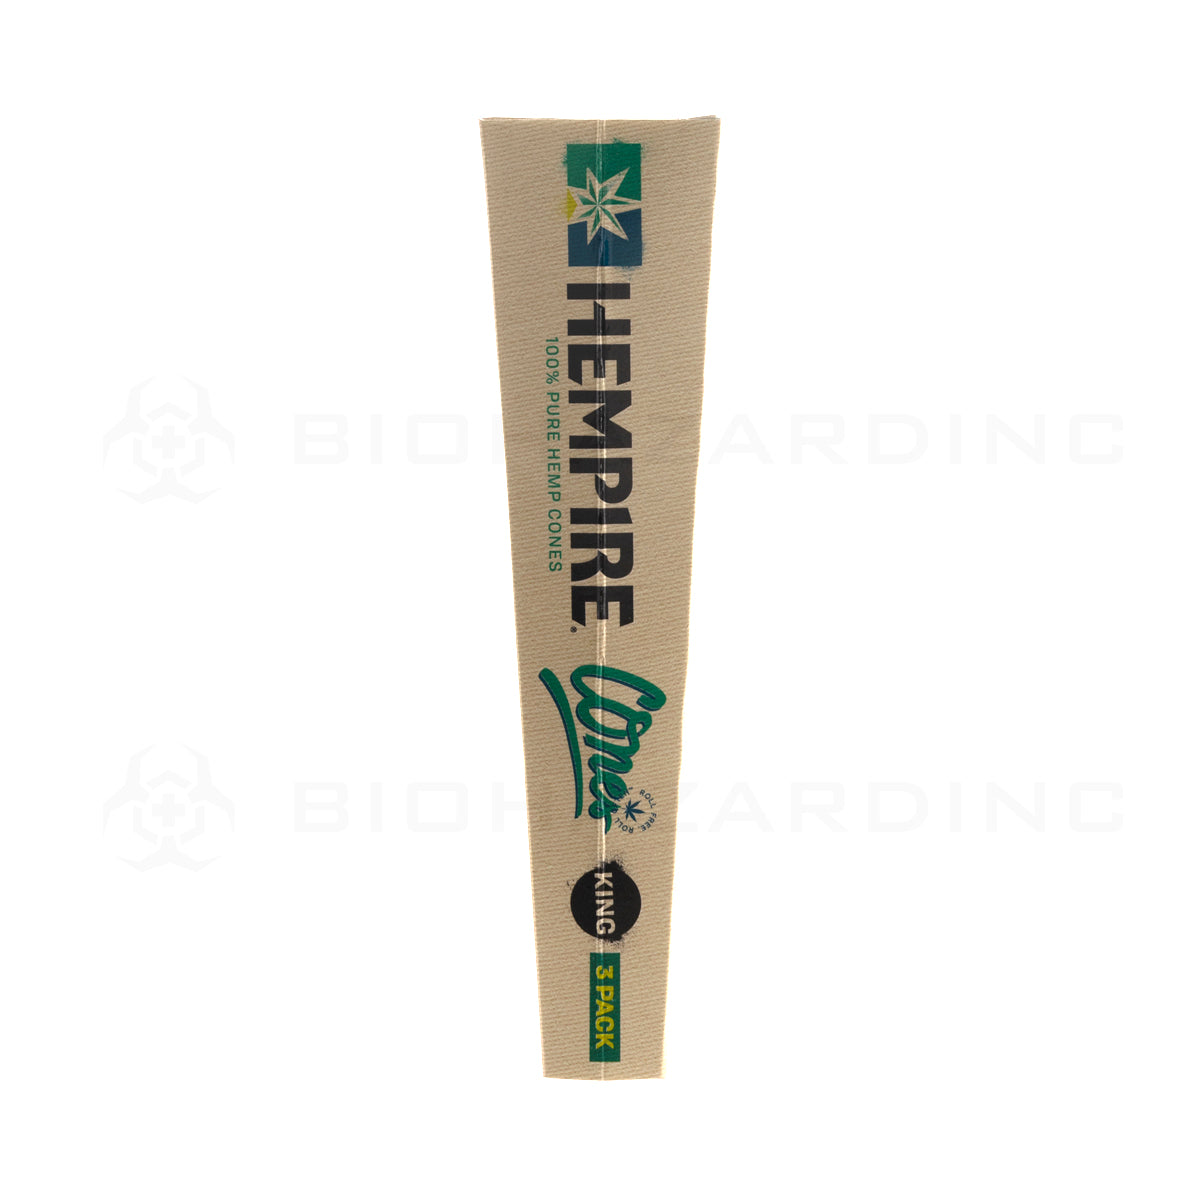 Hempire | Pre-Rolled Cones King Size | 110mm - Unbleached Paper - 24 Count Pre-Rolled Cones Biohazard Inc   